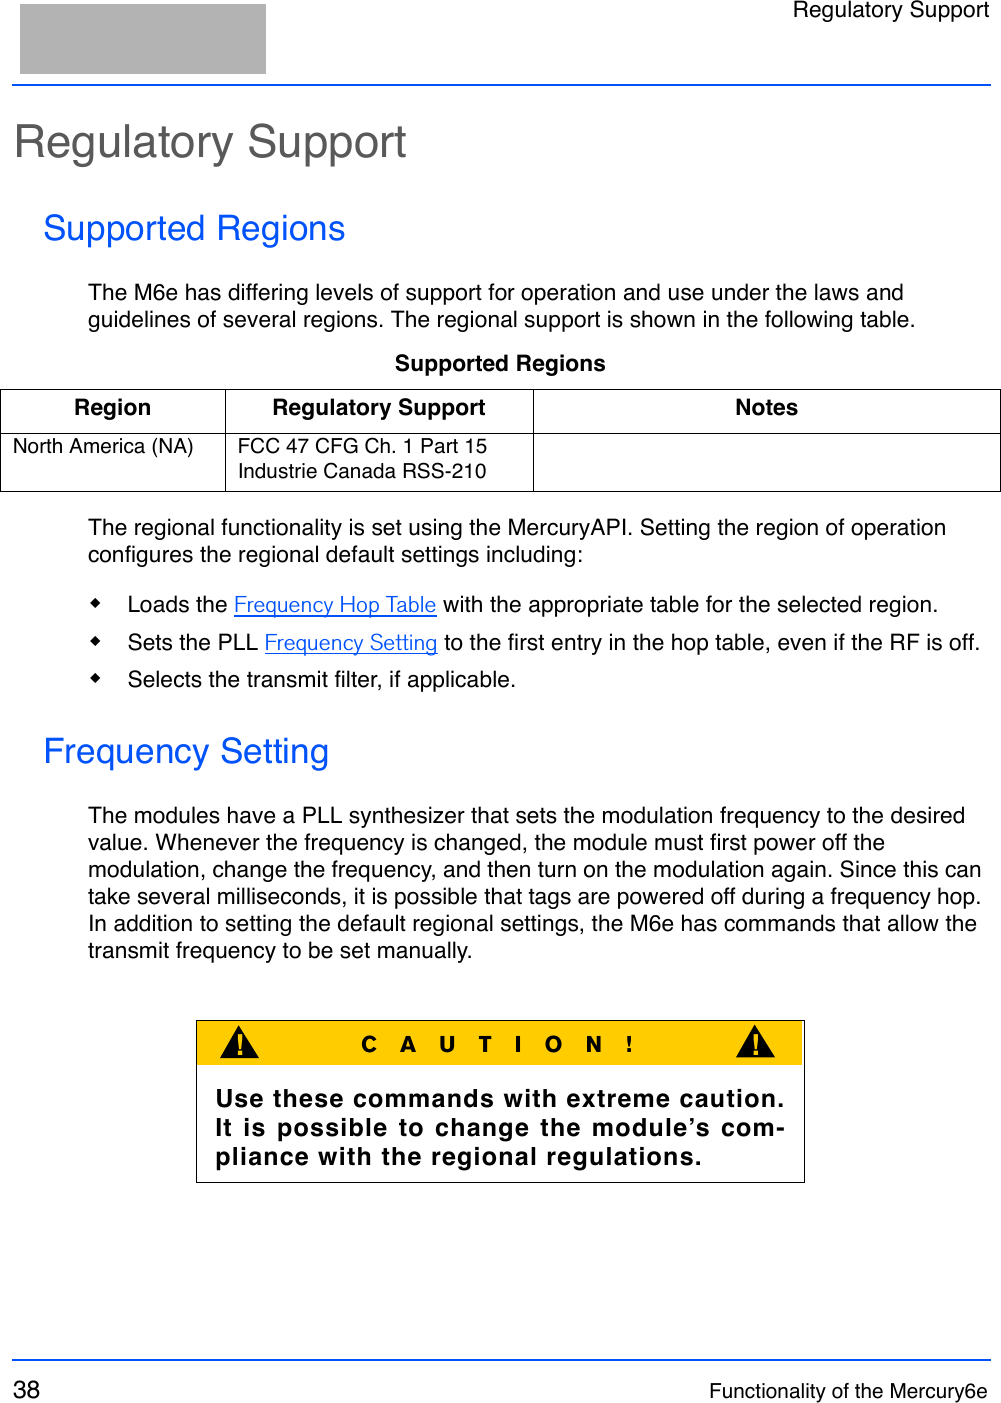 Regulatory Support38 Functionality of the Mercury6eRegulatory SupportSupported RegionsThe M6e has differing levels of support for operation and use under the laws and guidelines of several regions. The regional support is shown in the following table.The regional functionality is set using the MercuryAPI. Setting the region of operation configures the regional default settings including: Loads the Frequency Hop Table with the appropriate table for the selected region. Sets the PLL Frequency Setting to the first entry in the hop table, even if the RF is off. Selects the transmit filter, if applicable.Frequency SettingThe modules have a PLL synthesizer that sets the modulation frequency to the desired value. Whenever the frequency is changed, the module must first power off the modulation, change the frequency, and then turn on the modulation again. Since this can take several milliseconds, it is possible that tags are powered off during a frequency hop. In addition to setting the default regional settings, the M6e has commands that allow the transmit frequency to be set manually. Supported RegionsRegion Regulatory Support NotesNorth America (NA) FCC 47 CFG Ch. 1 Part 15Industrie Canada RSS-210CAUTION!!!Use these commands with extreme caution.It is possible to change the module’s com-pliance with the regional regulations.